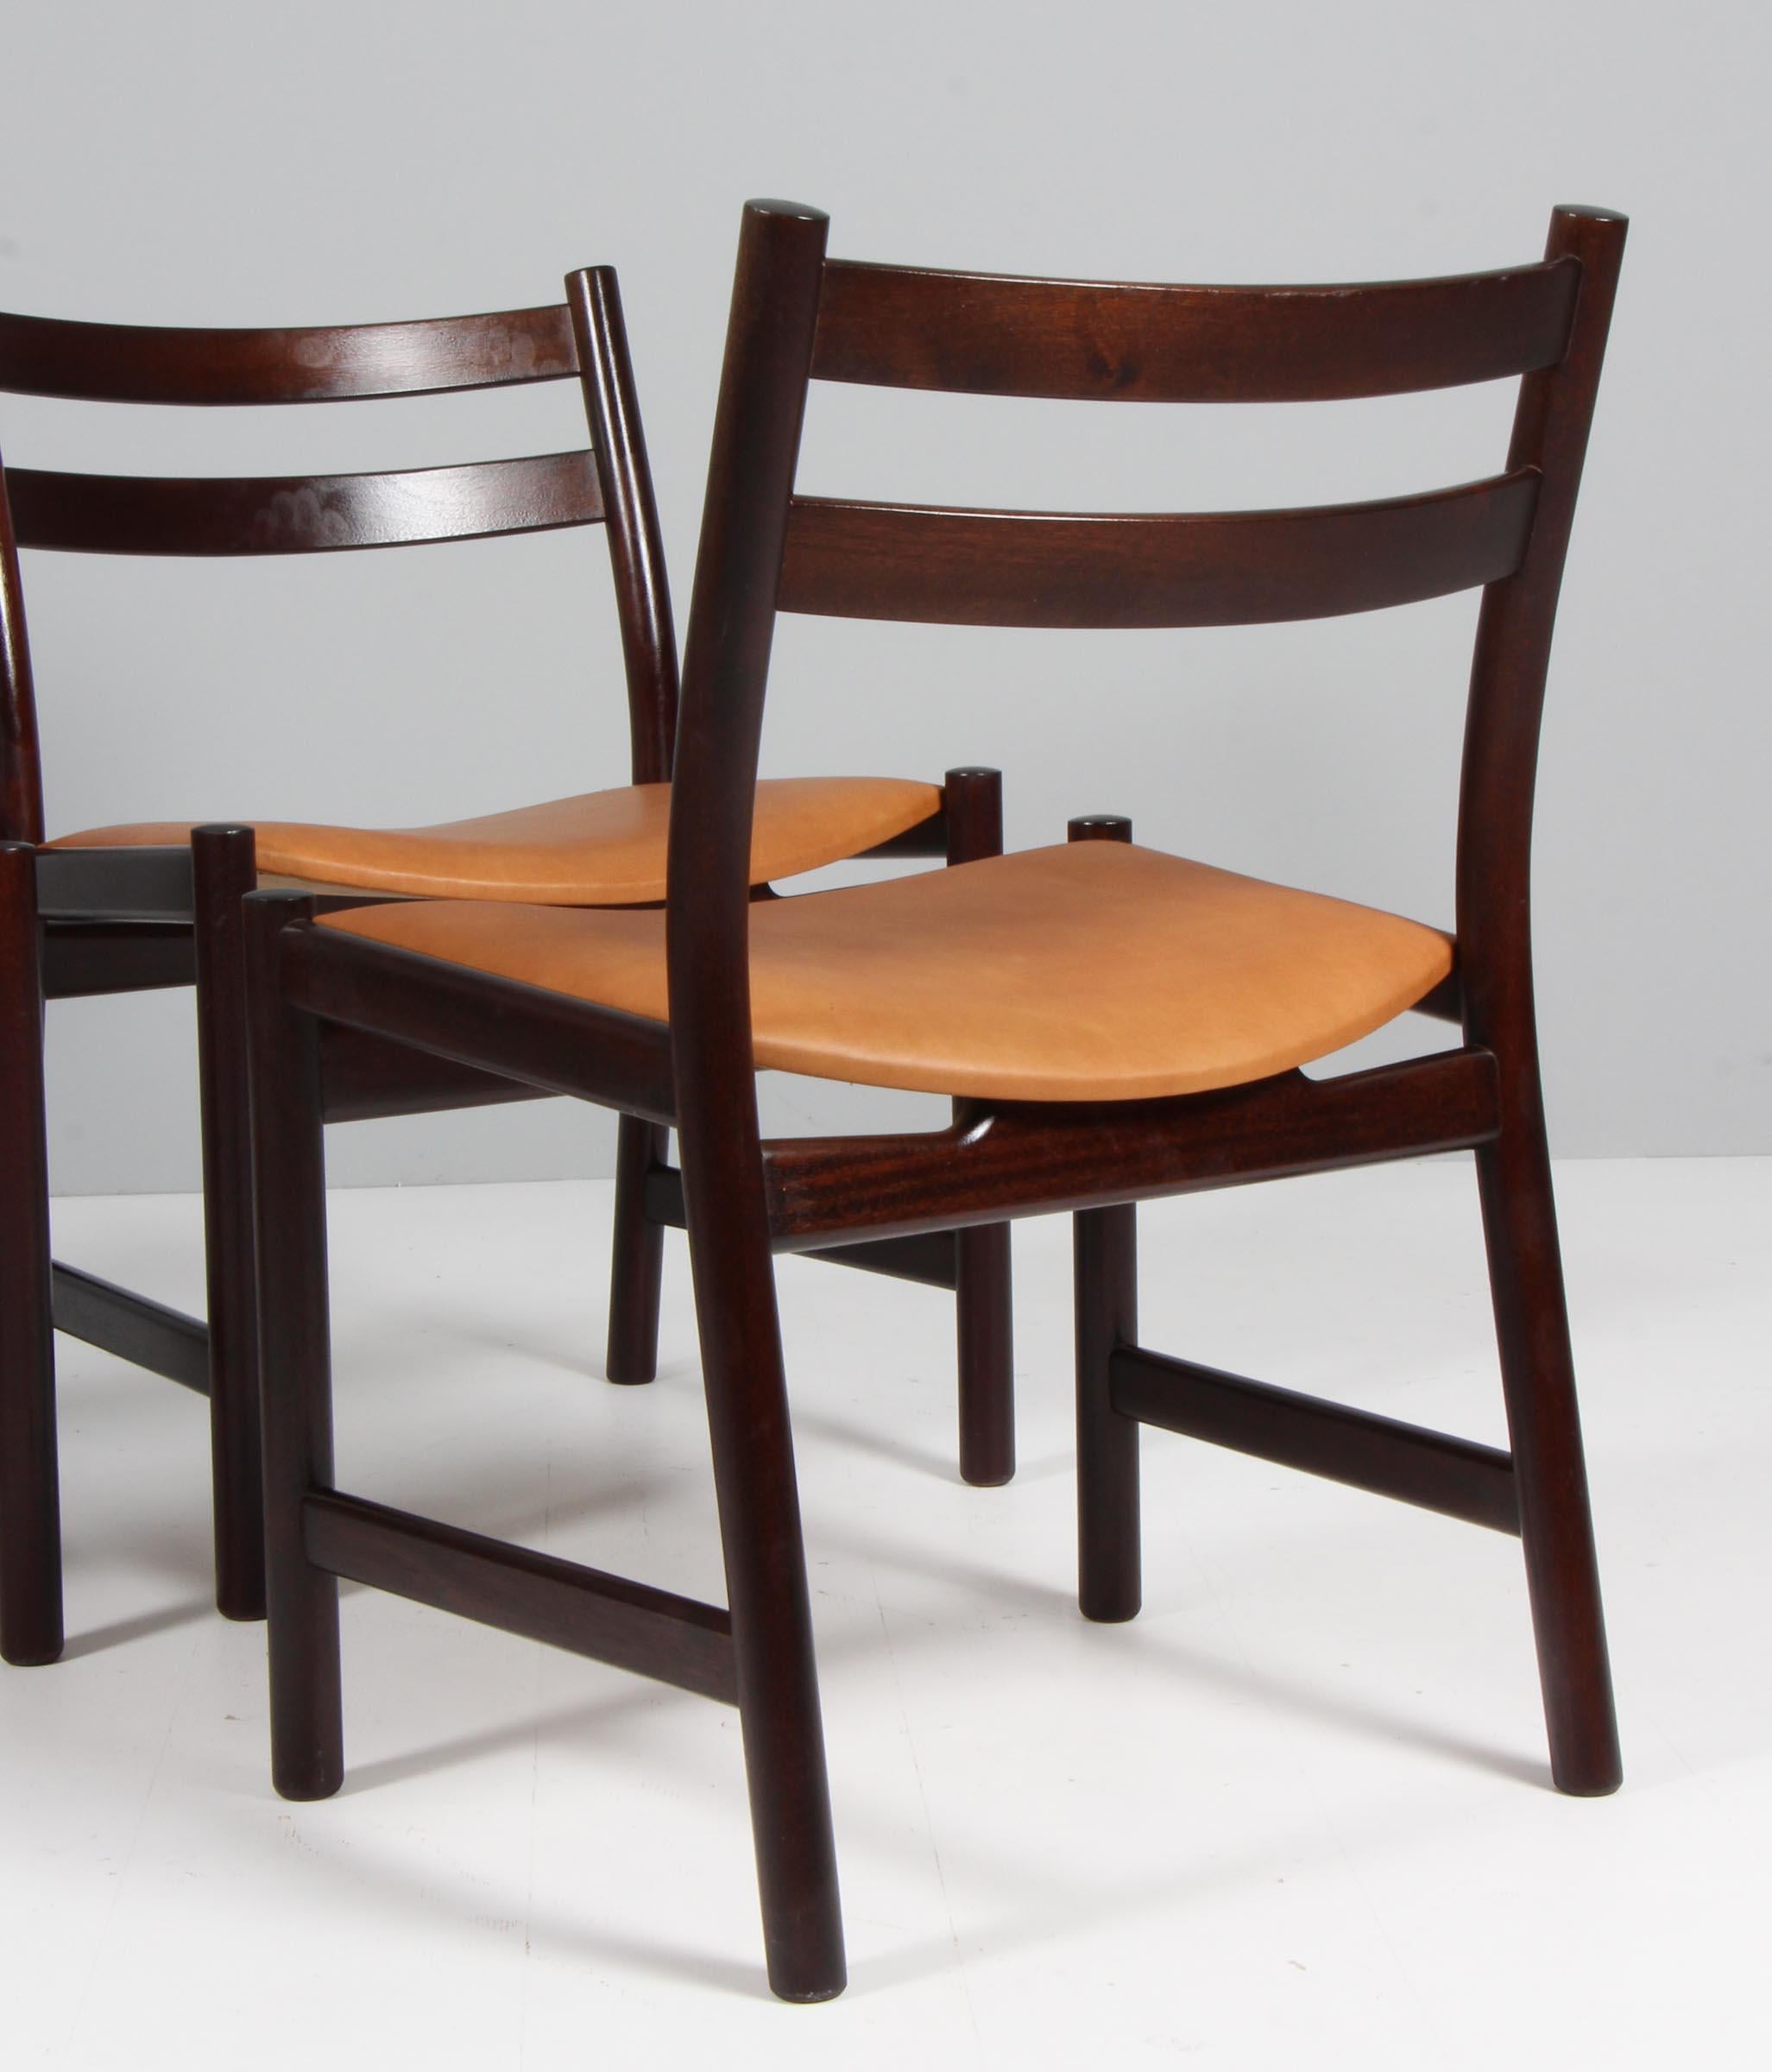 Mid-20th Century Set of Four Hans J. Wegner Dining Chairs Model CH-47 in mahogany For Sale